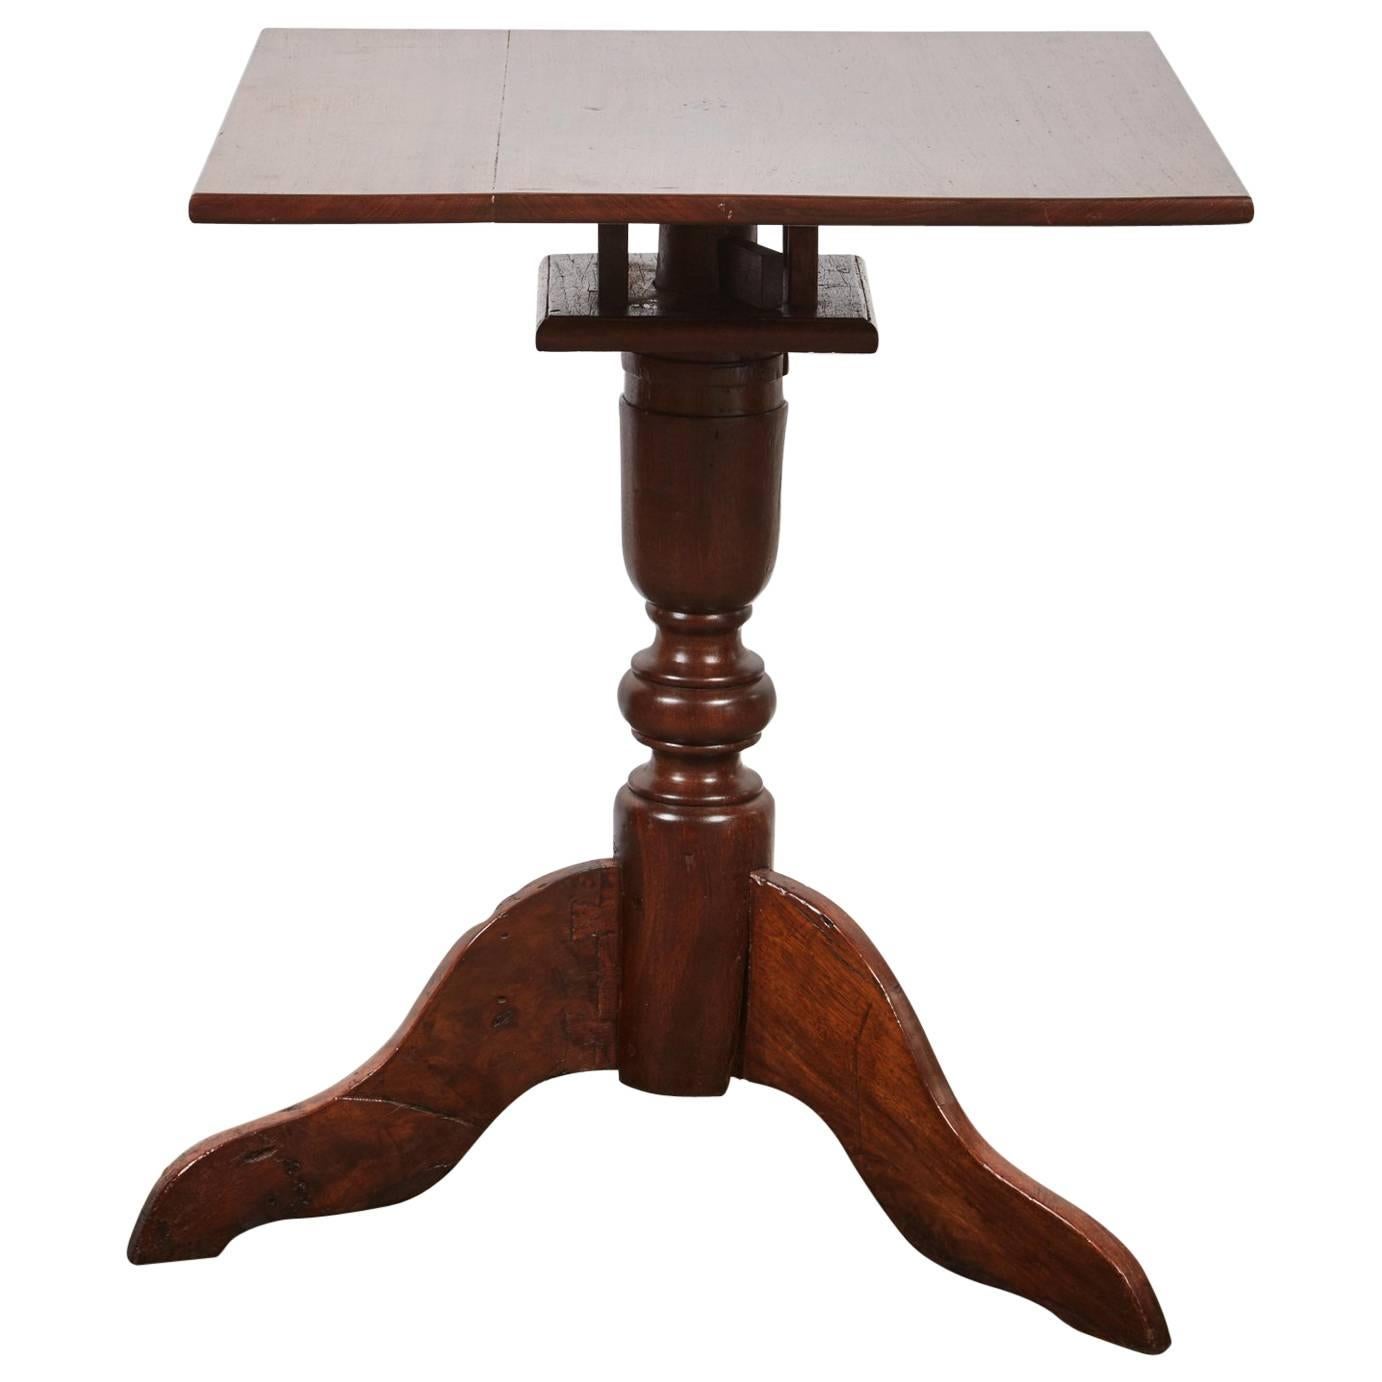 Mid-19th Century Tindalo Wood Square Top Pedestal Table